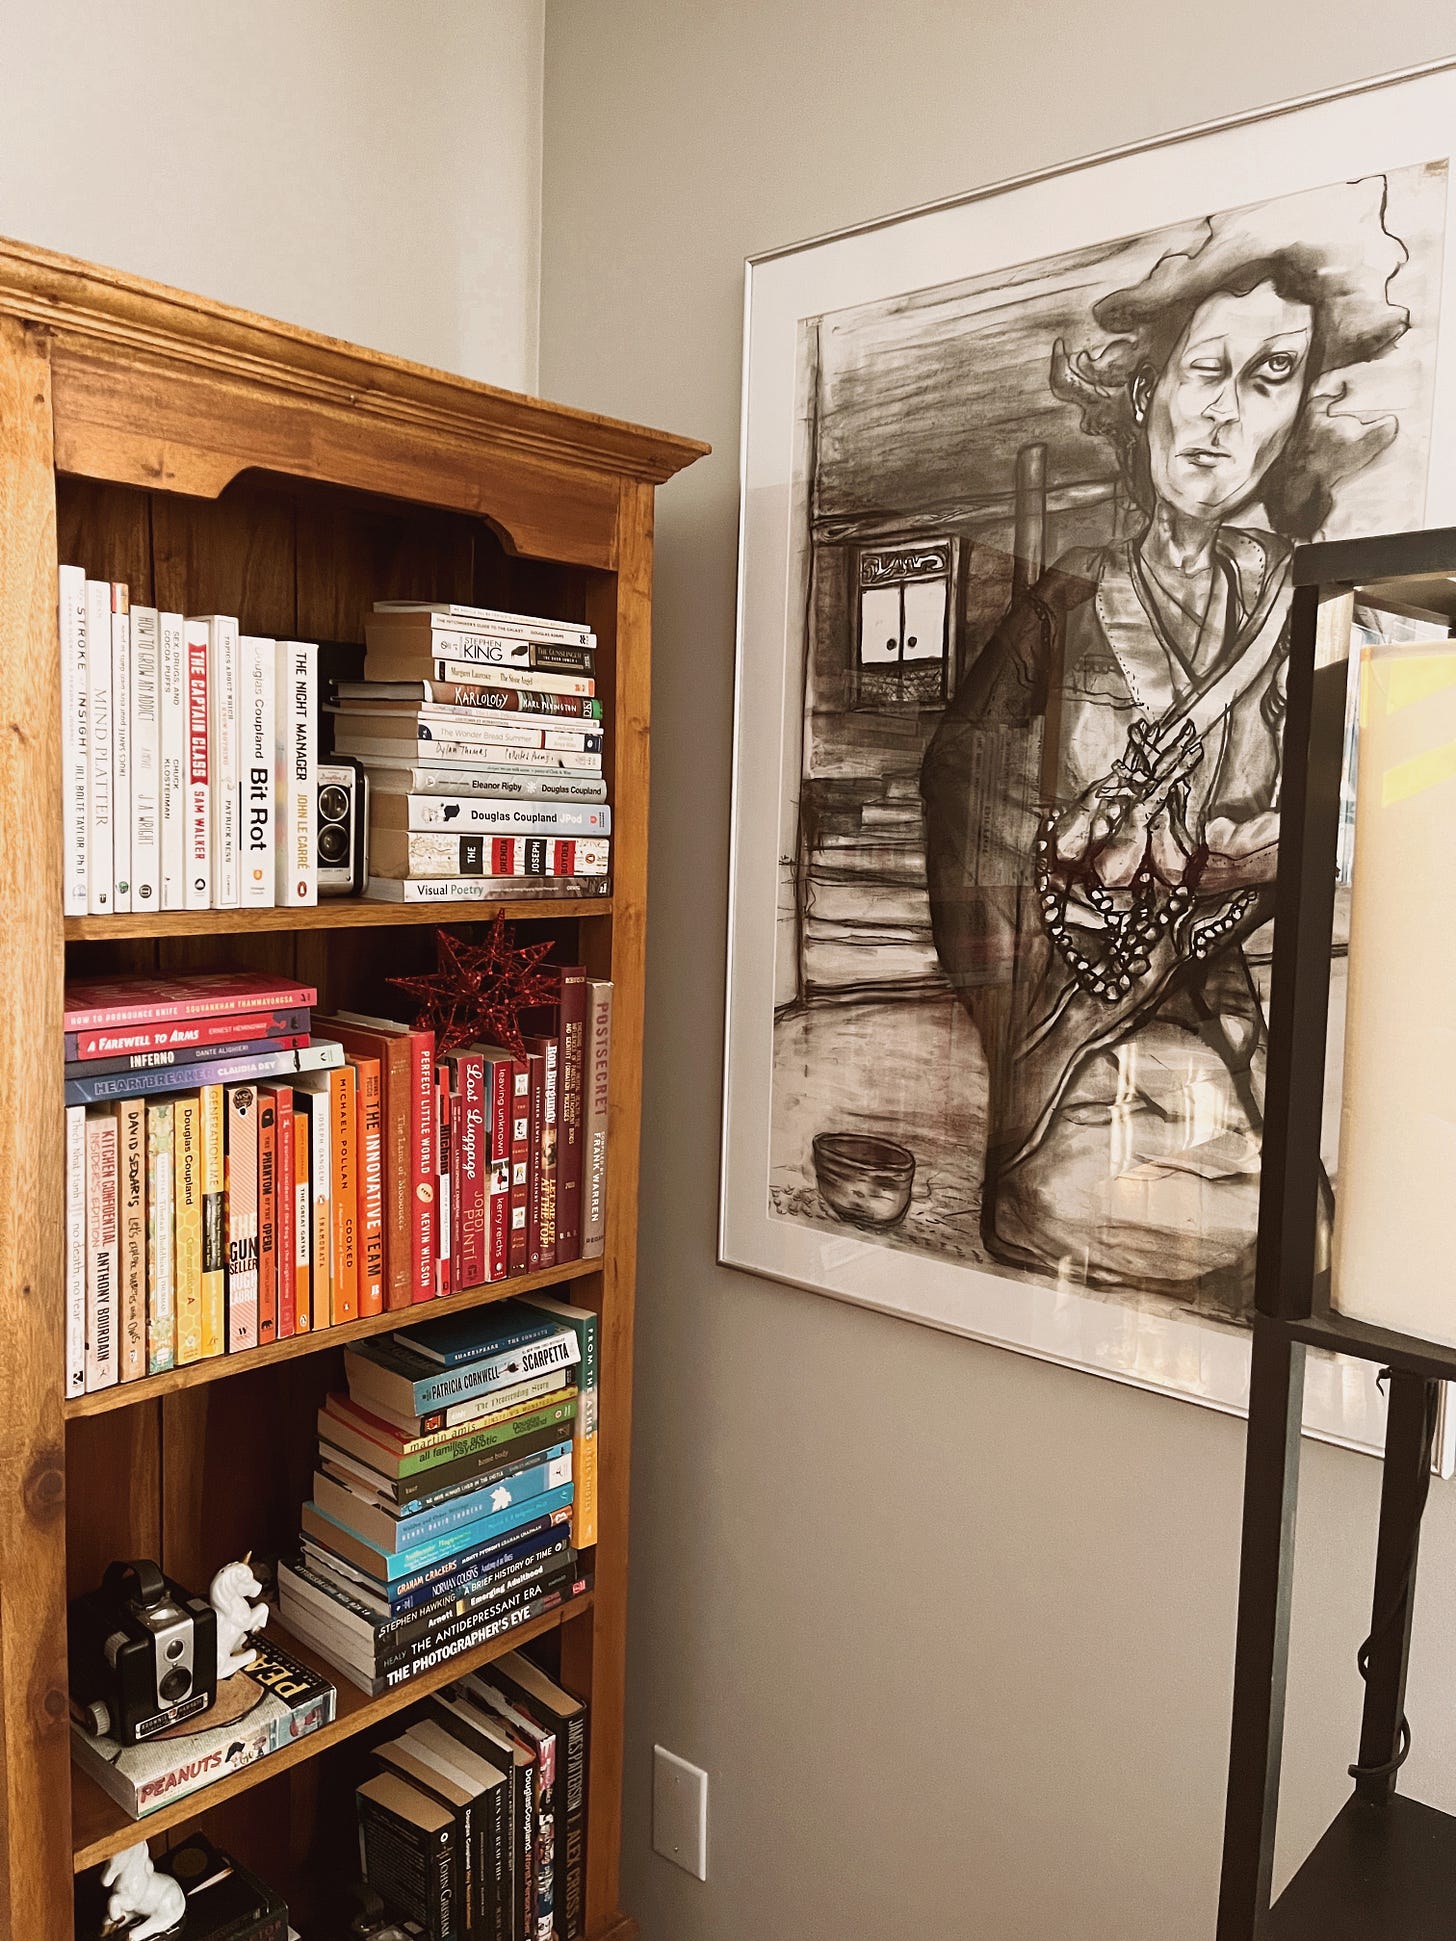 Large charcoal drawing of a woman clutching prayer beads and looking askance at the heavens, one eye open. Next to the picture is a bookshelf where I've organized my books by colour of the covers.